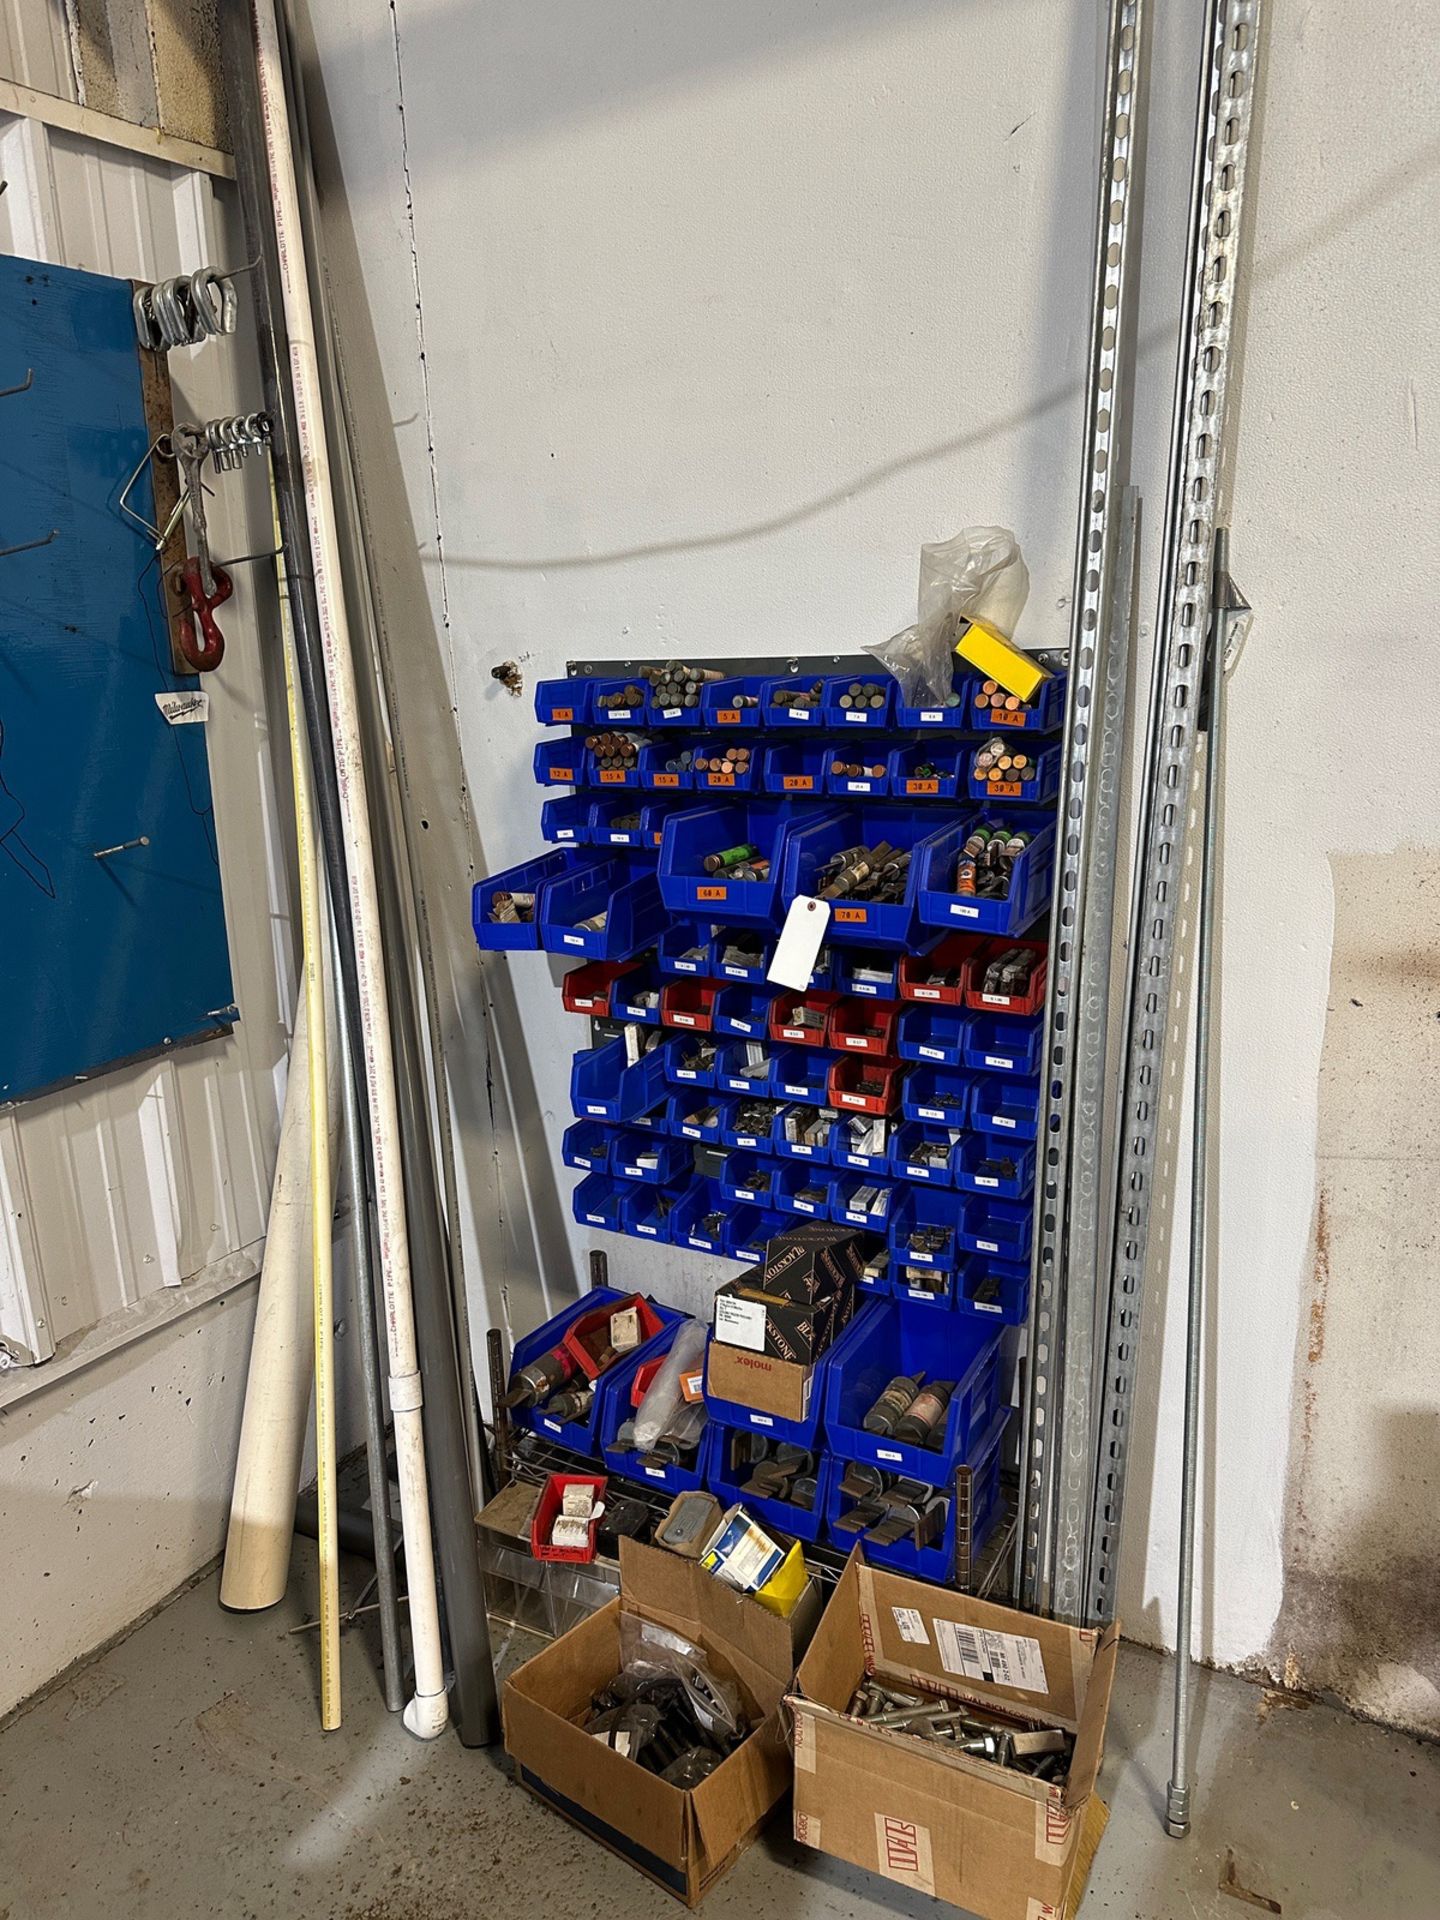 Lot of Pigeon Hole Shelving Parts Bins with Fuses, Strapping and Assorte | Rig Fee $50 - Image 2 of 5